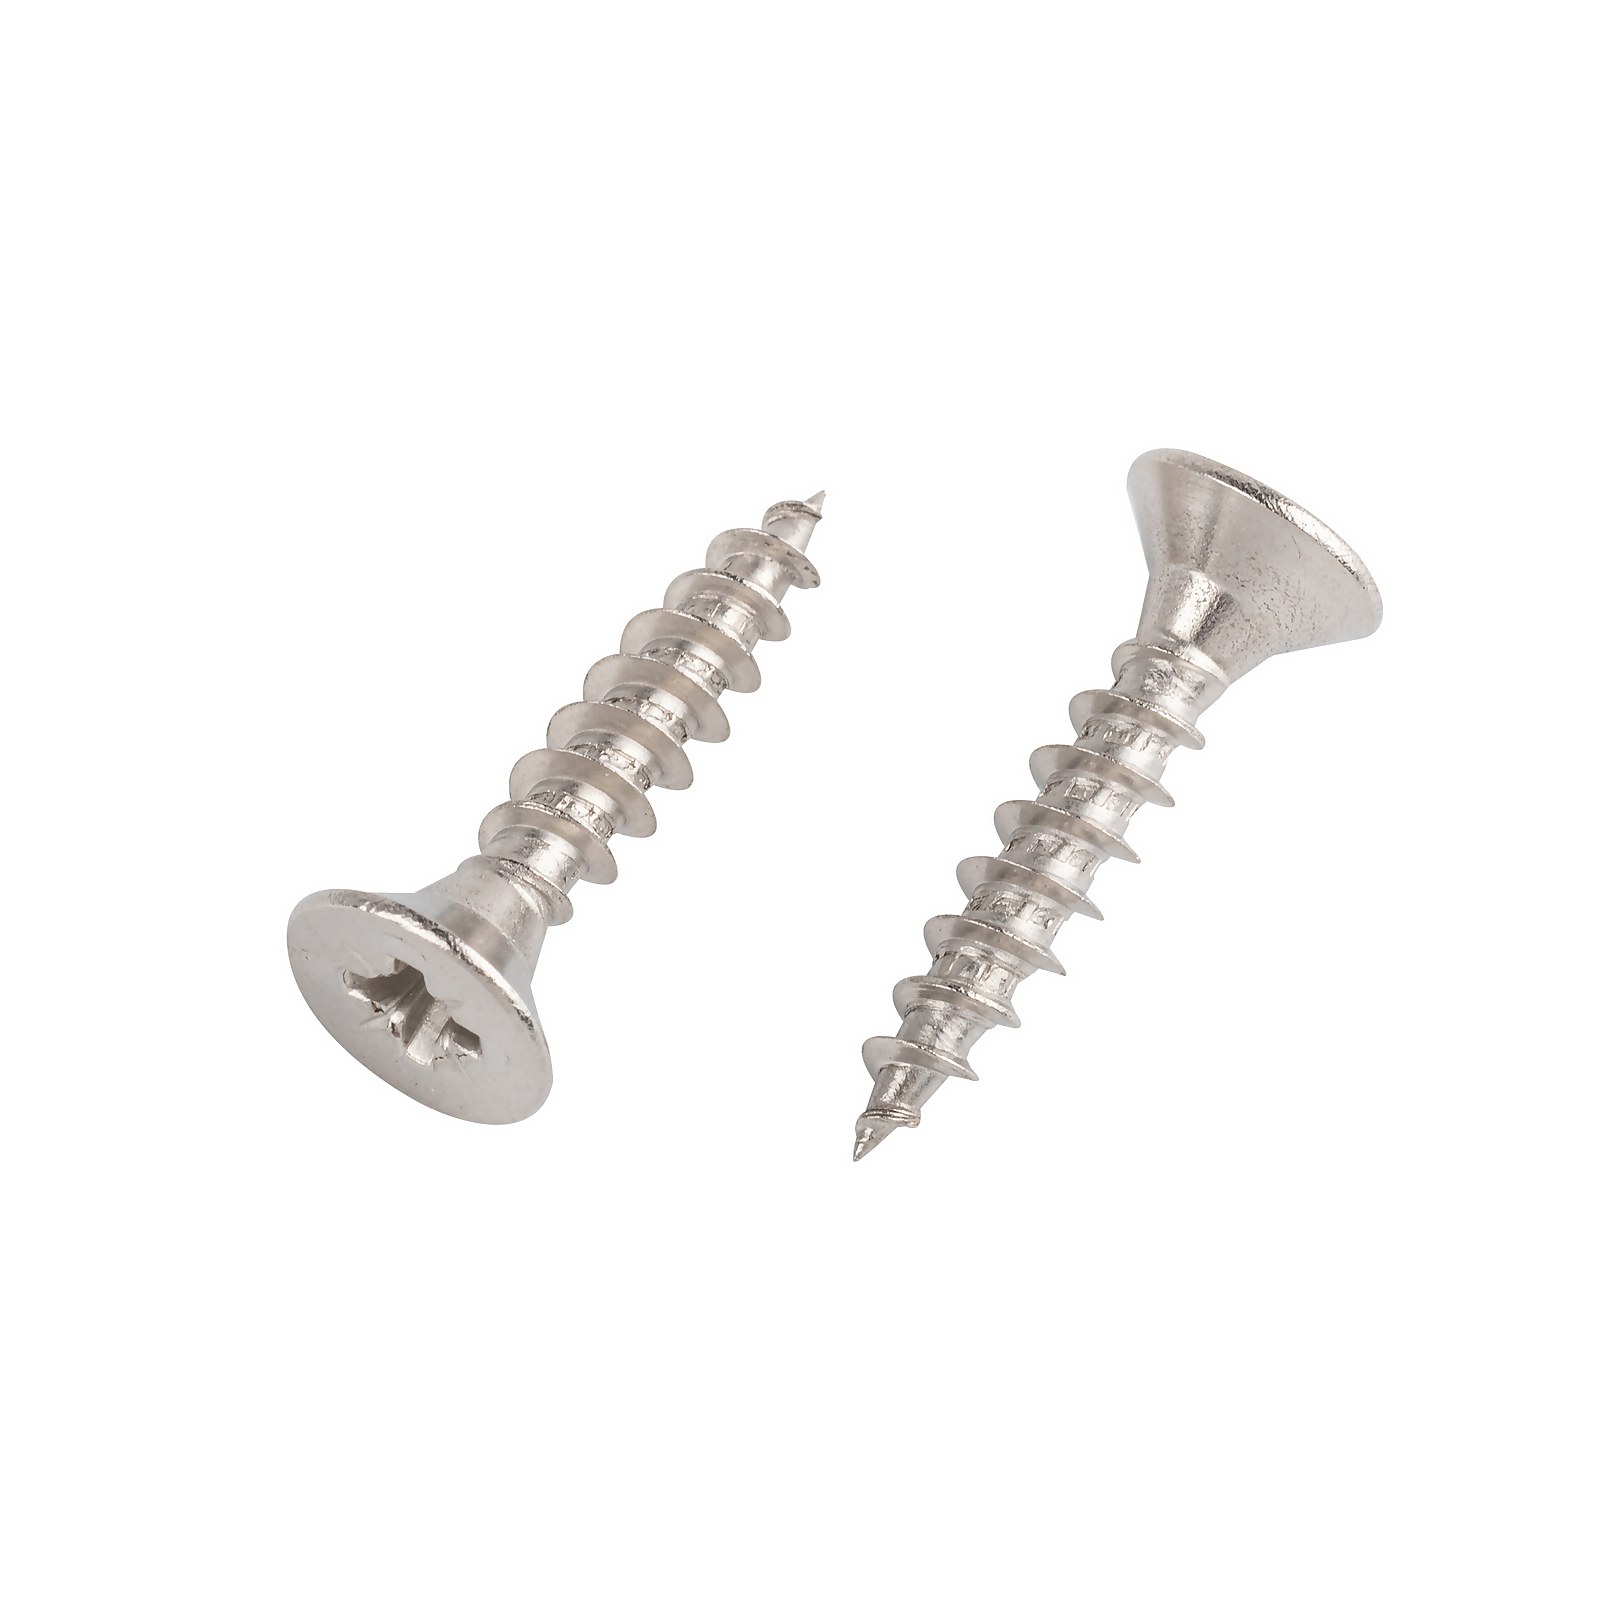 Photo of Homebase Stainless Steel Single Thread Screw 5 X 25mm 25 Pack